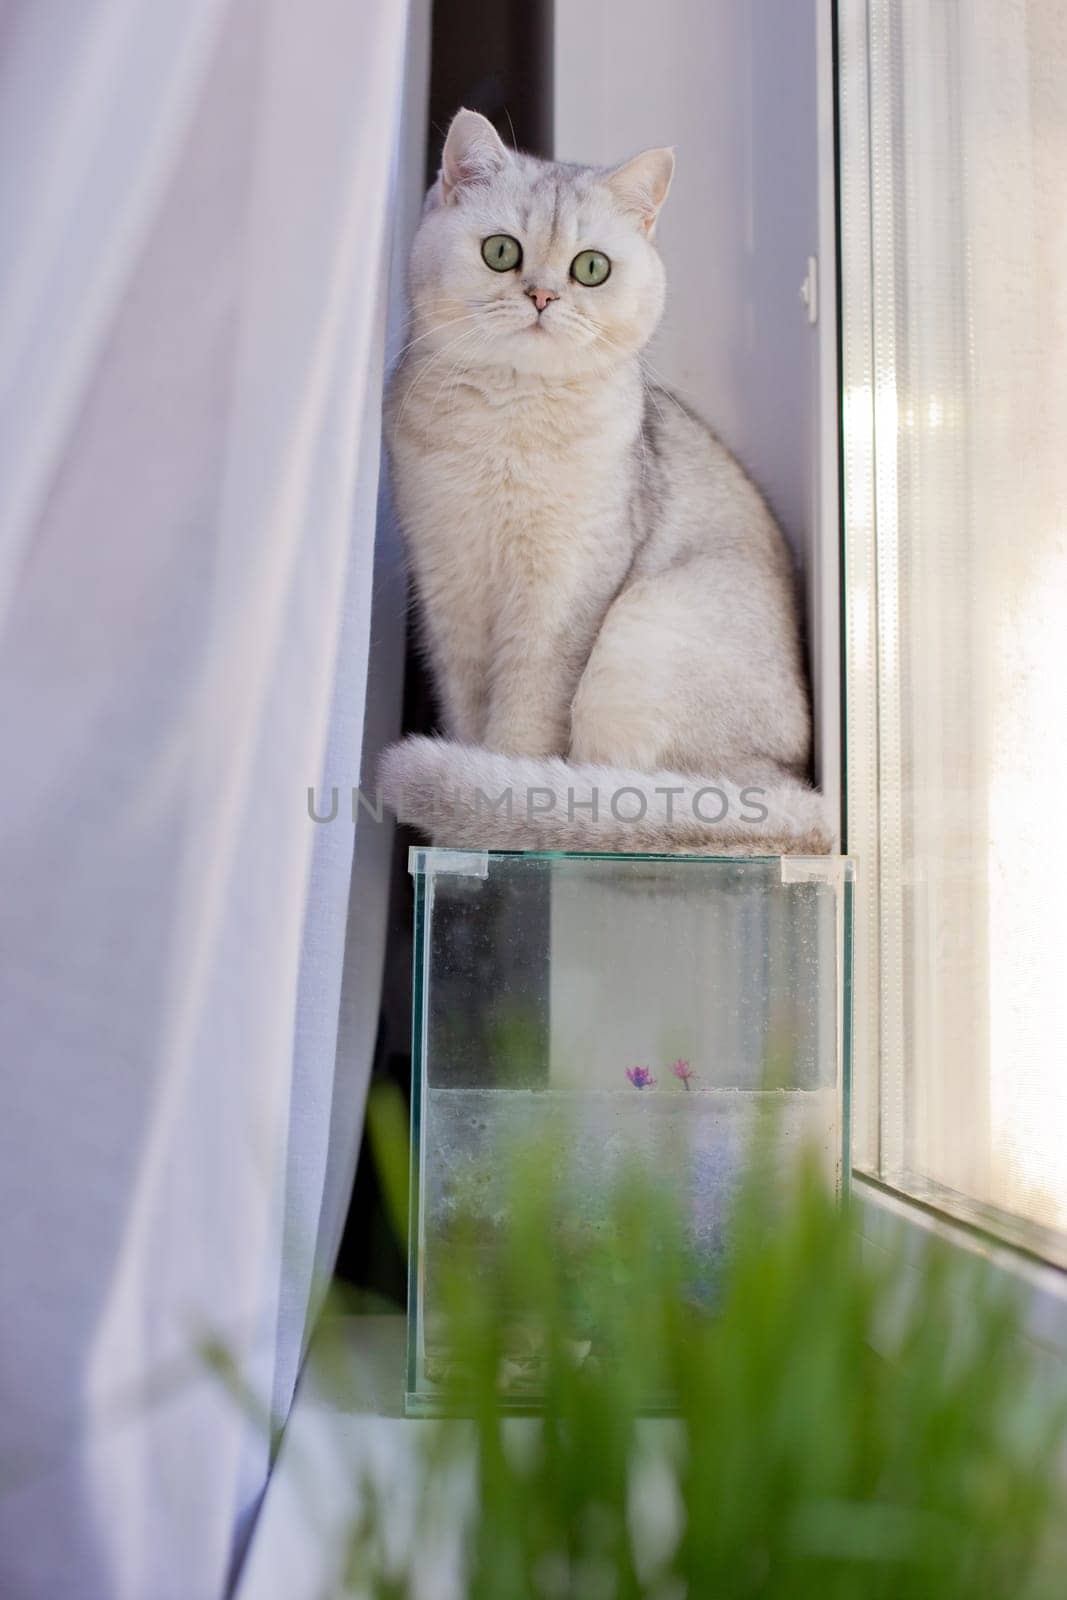 Adorable white british short hair cat sitting on an empty aquarium by the window.